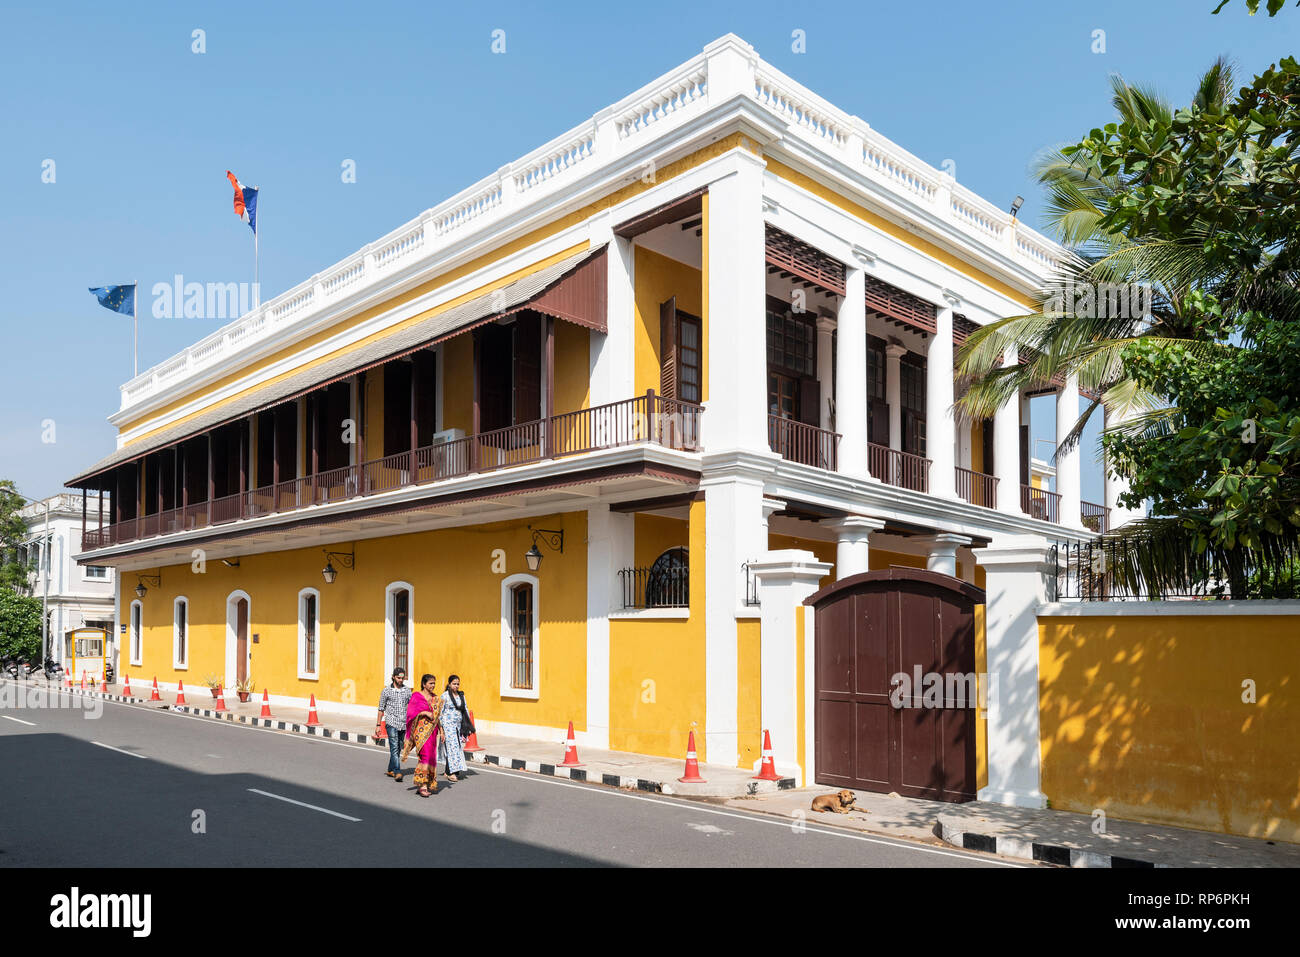 Allocated to the French Consulate General in 1956, the building is typical of the style and architecture in this part of Pondicherry. Stock Photo